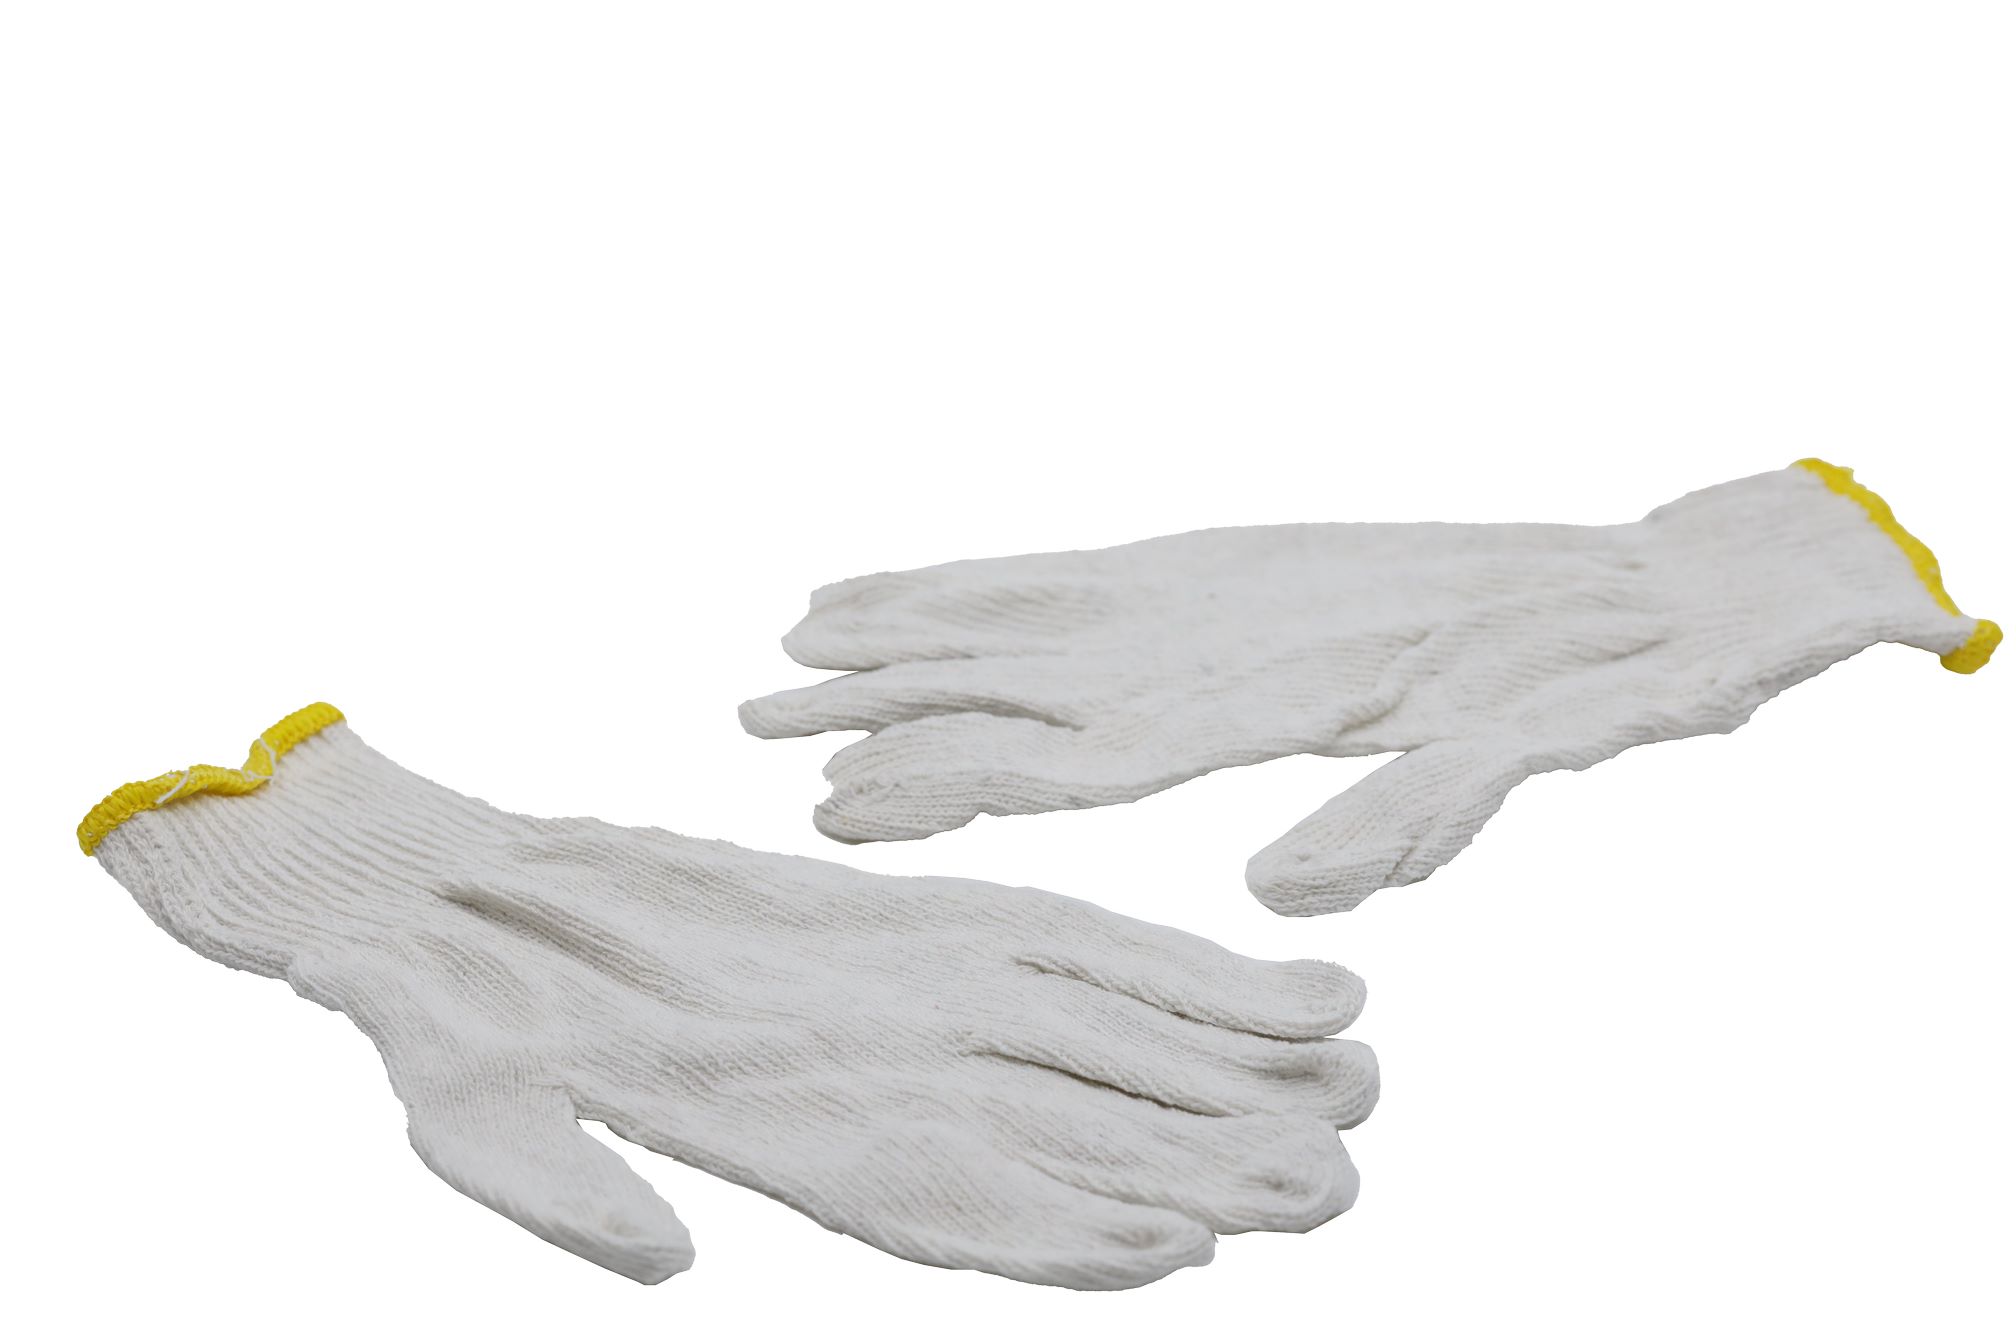 Buy COTTON GLOVES-TOP QUALITY Online | Safety | Qetaat.com